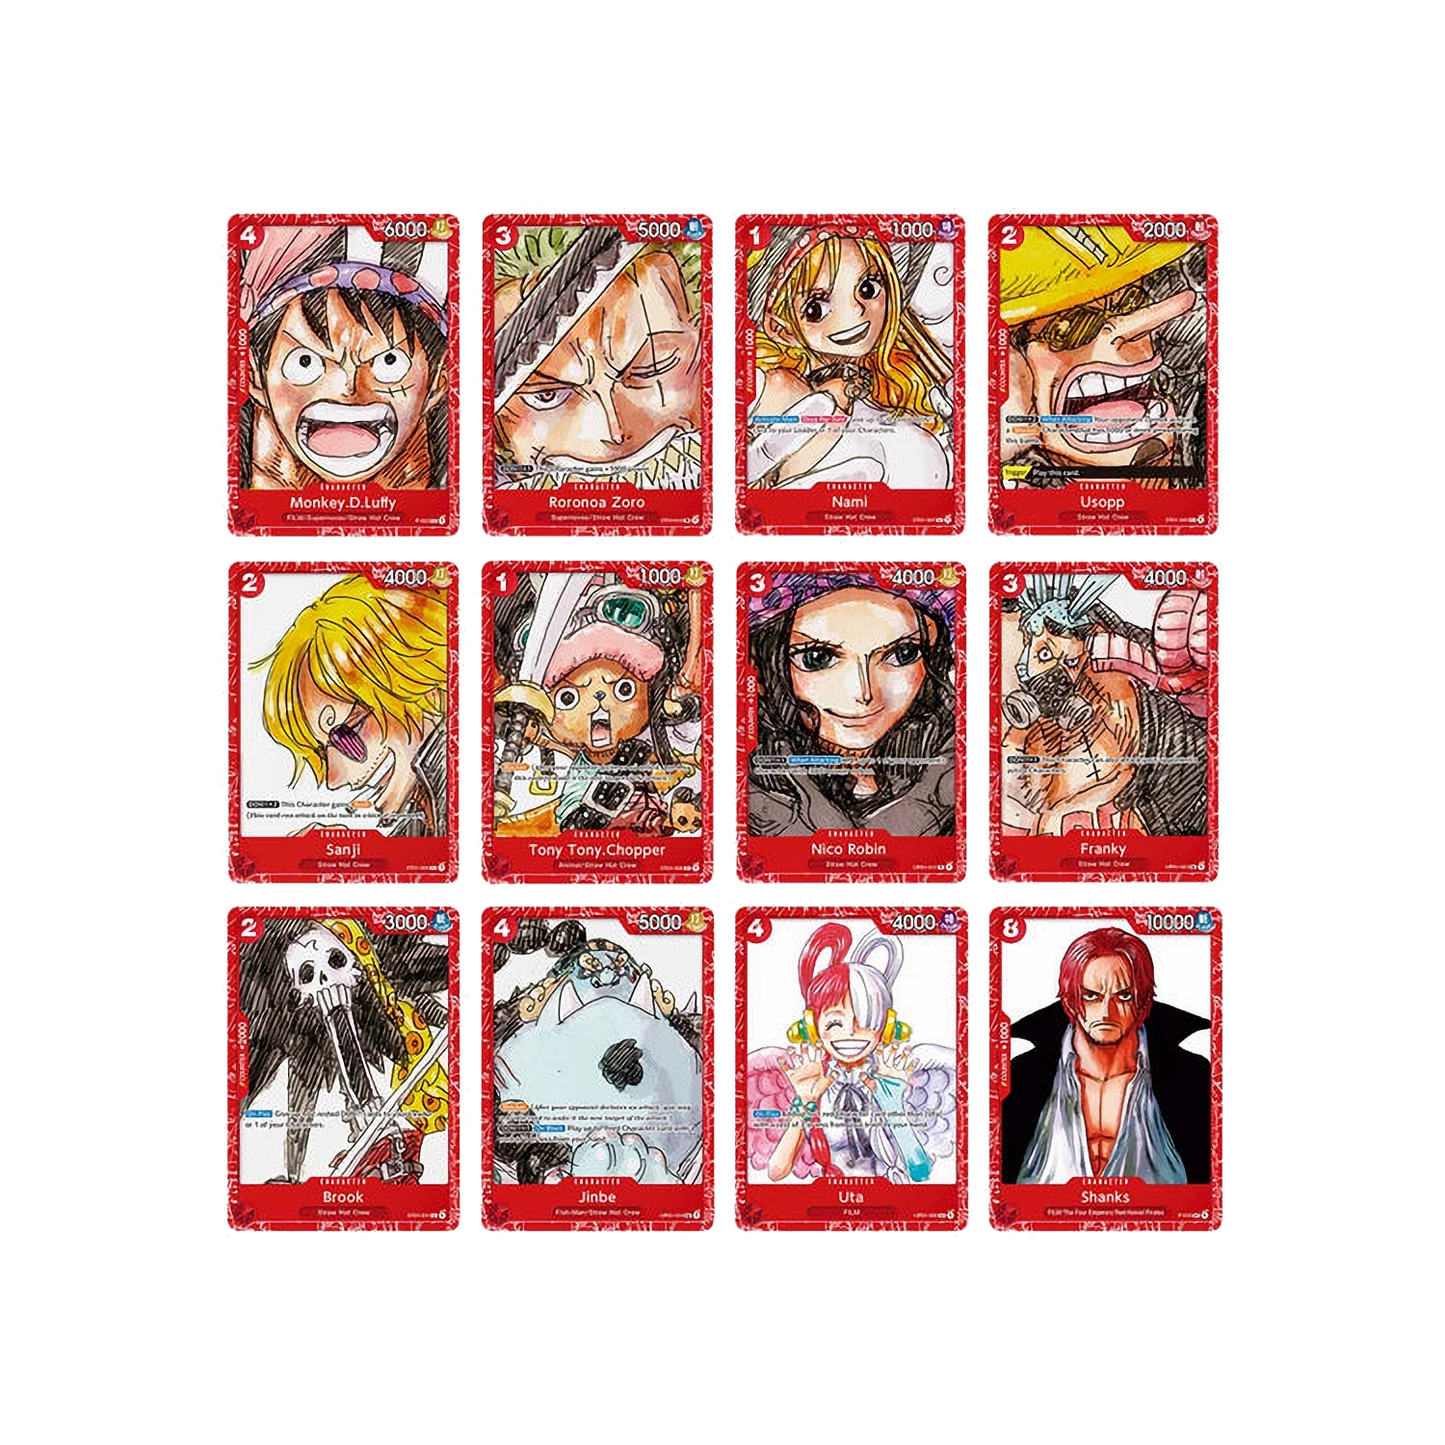 One Piece Card Game: Premium Card Collection -FILM RED Edition-